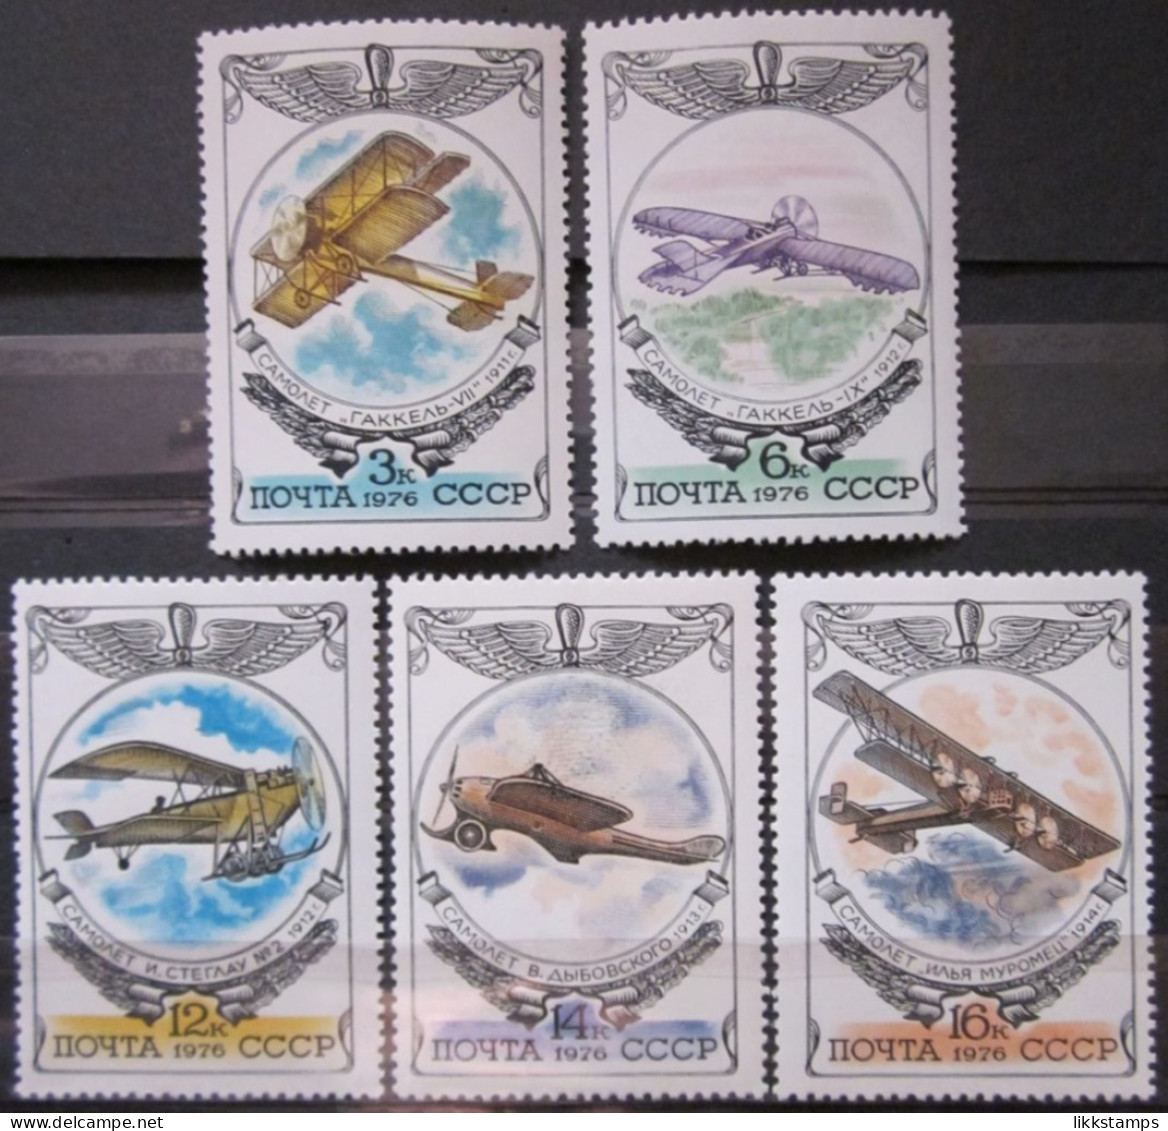 RUSSIA ~ 1976 ~ S.G. NUMBERS 4580 - 4584. ~ AIRCRAFT. ~ MNH #03583 - Neufs